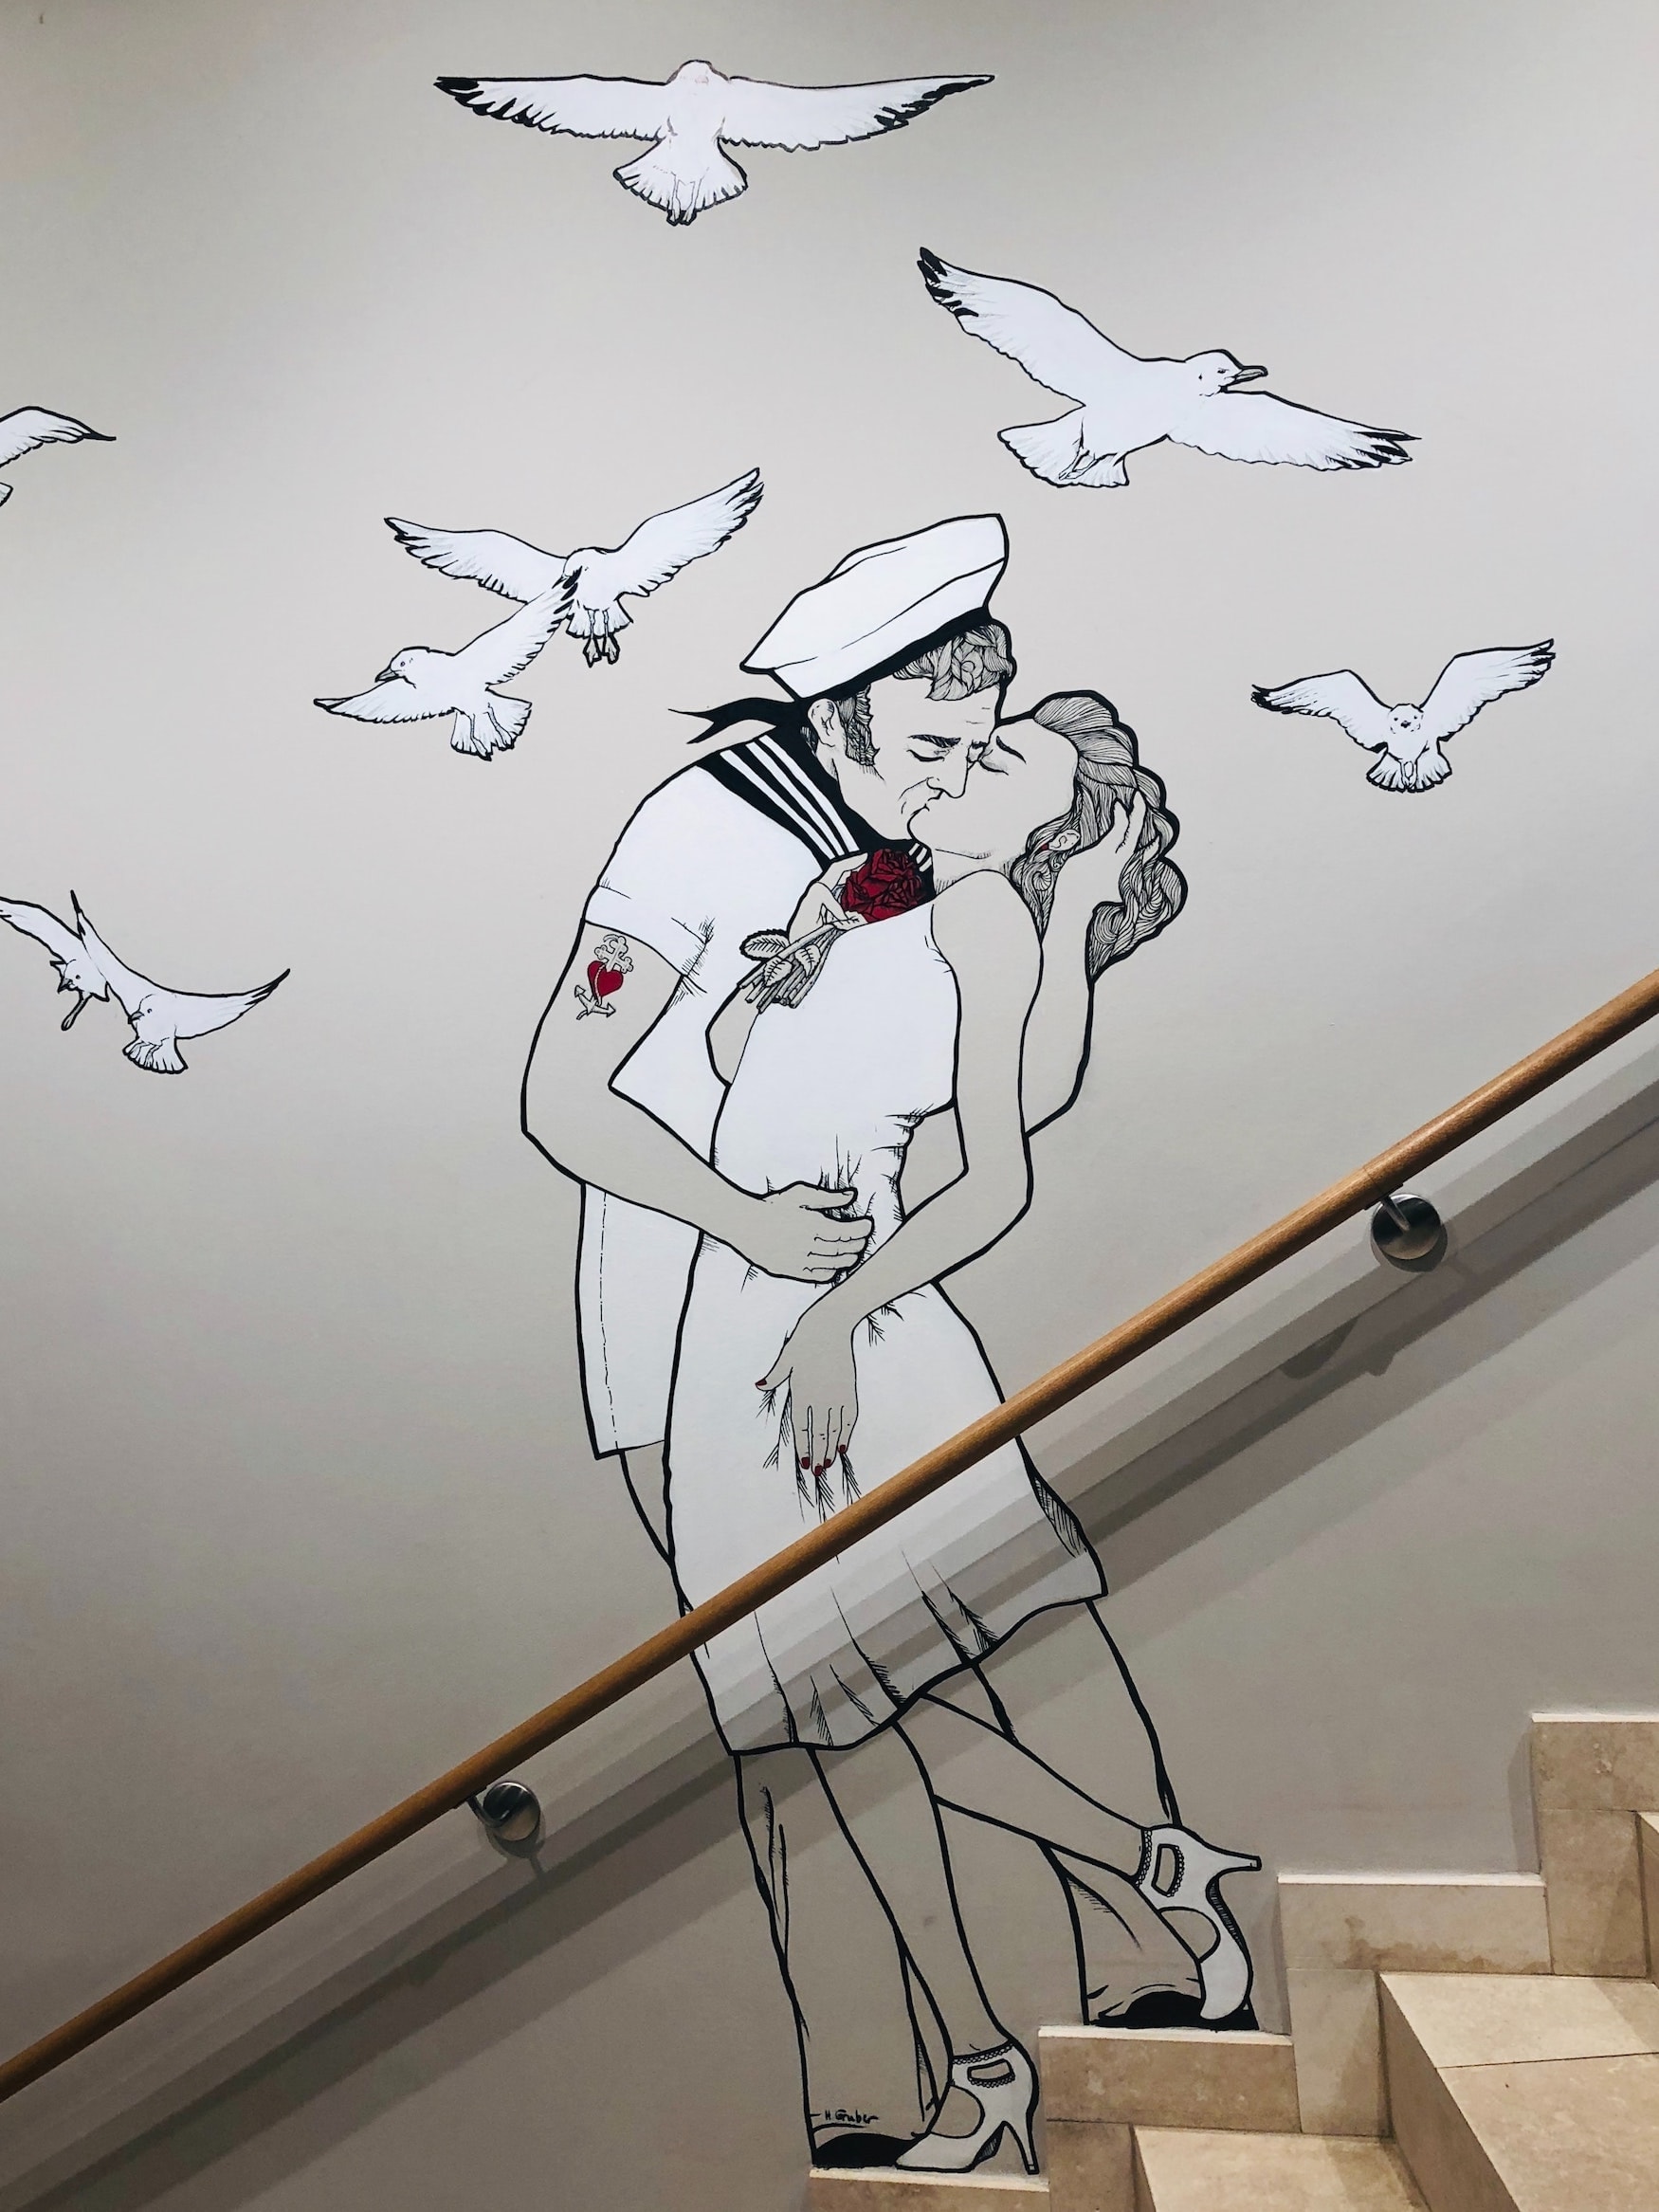 Street art in Hamburg with two people kissing, a sailor and a woman